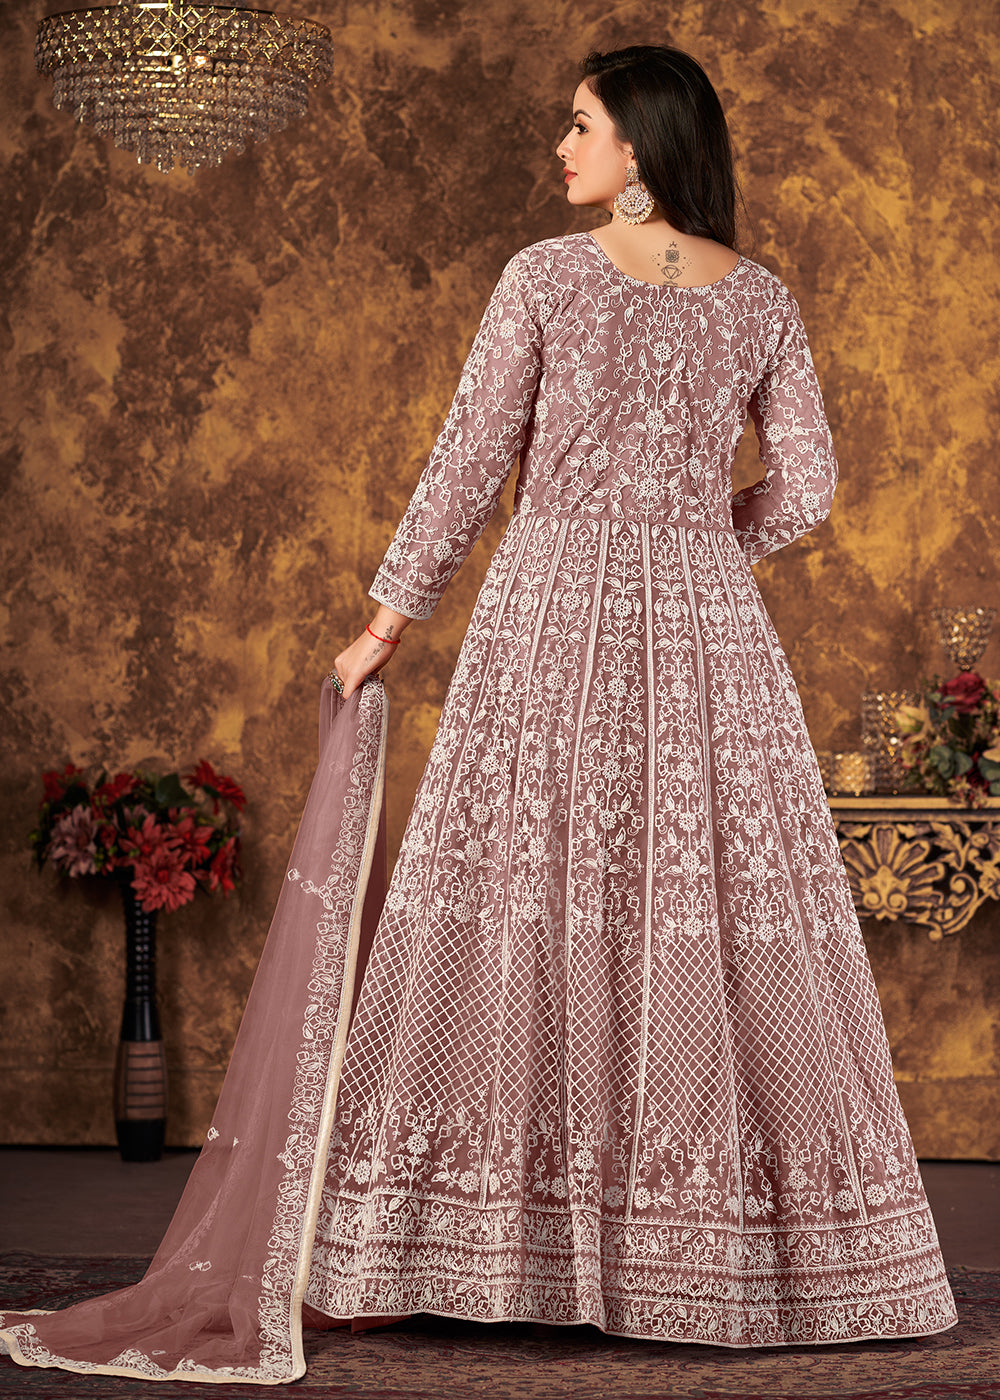 Buy Now Charming Mauve Cording Embroidered Wedding Anarkali Dress Online in Canada at Empress Clothing.